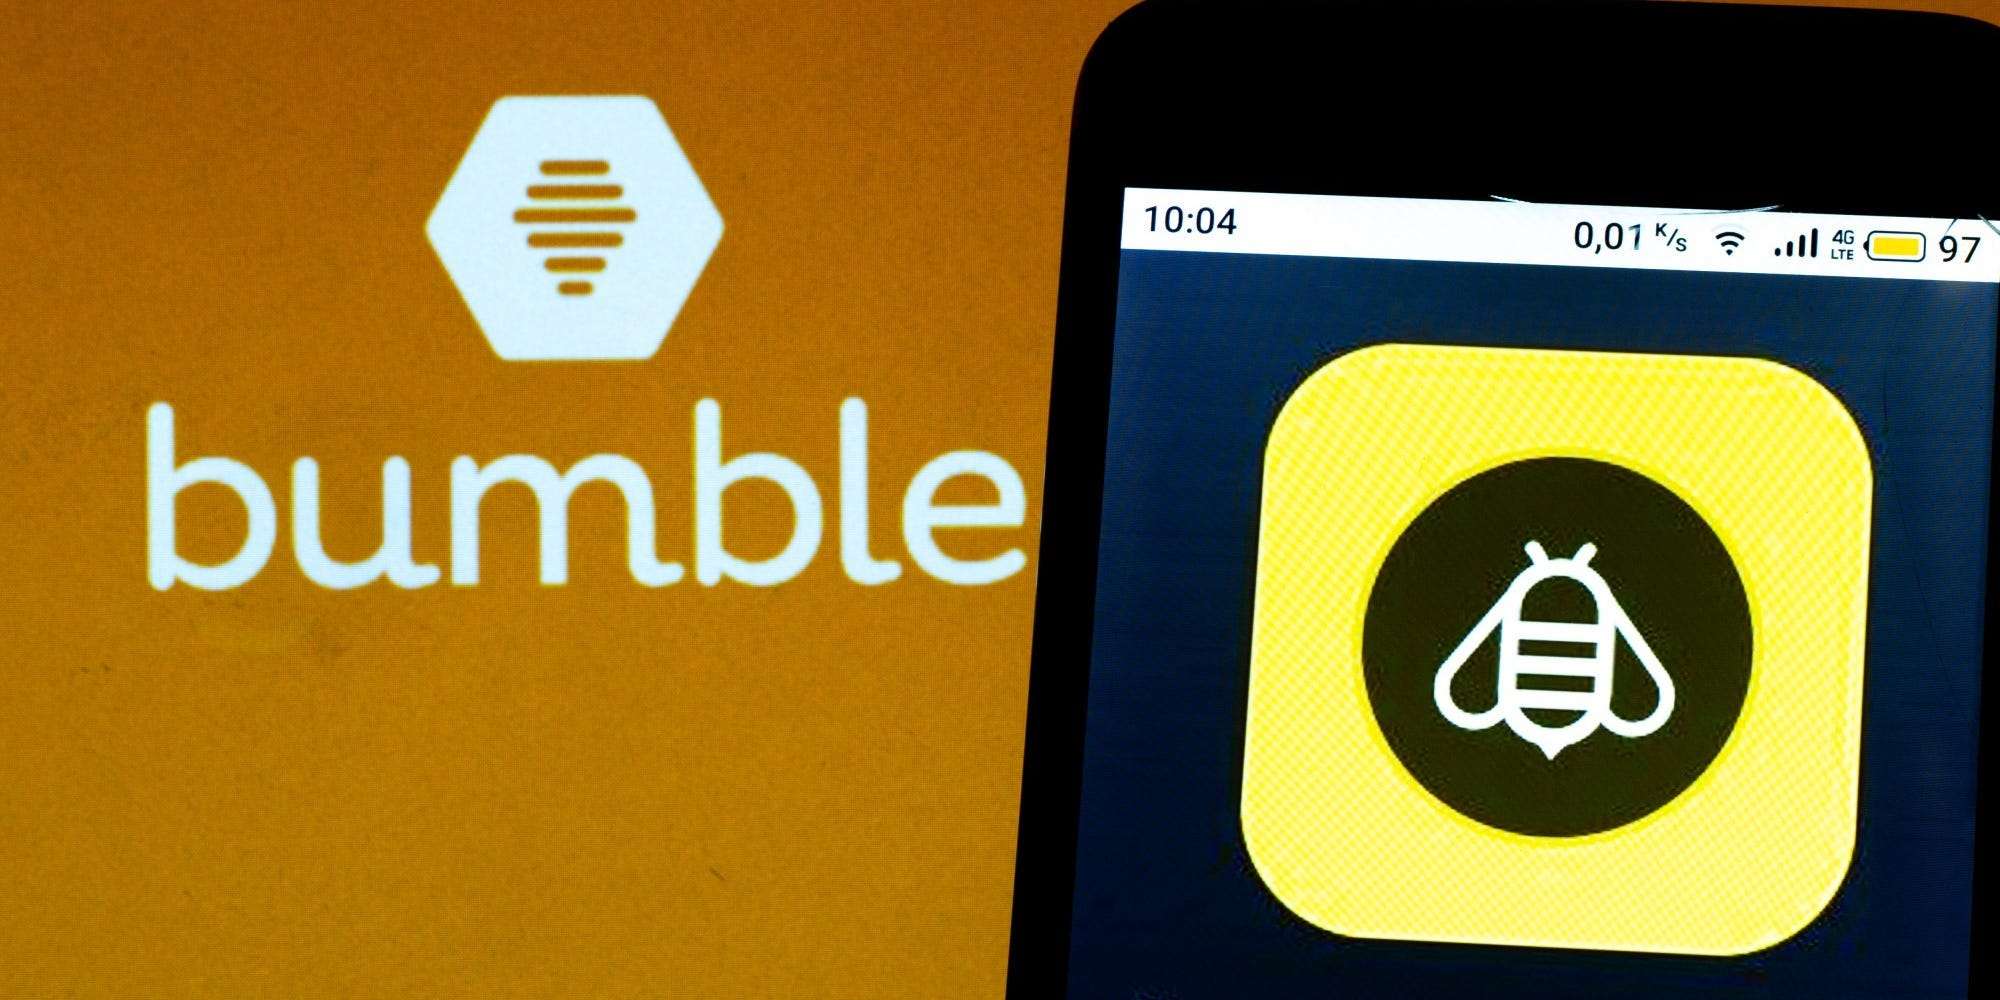 no matches peed dating bumble